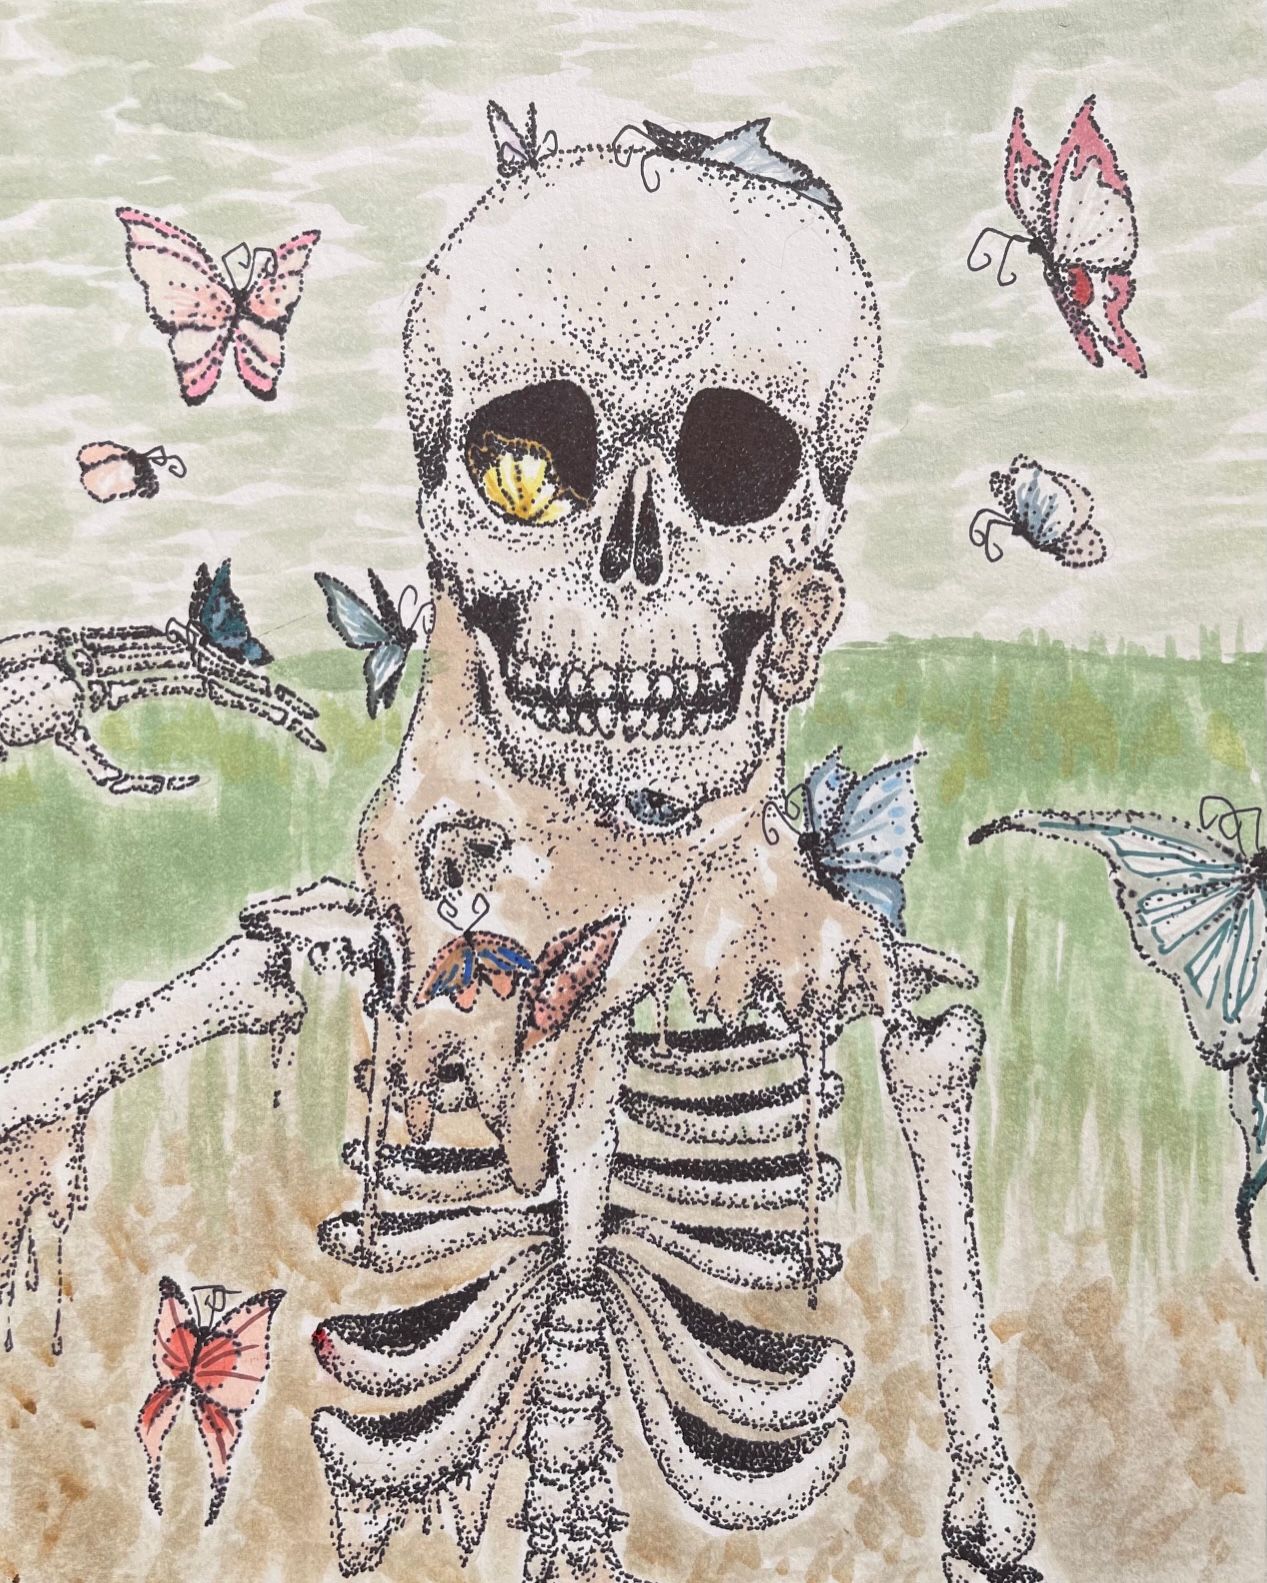 A painting of a skeleton